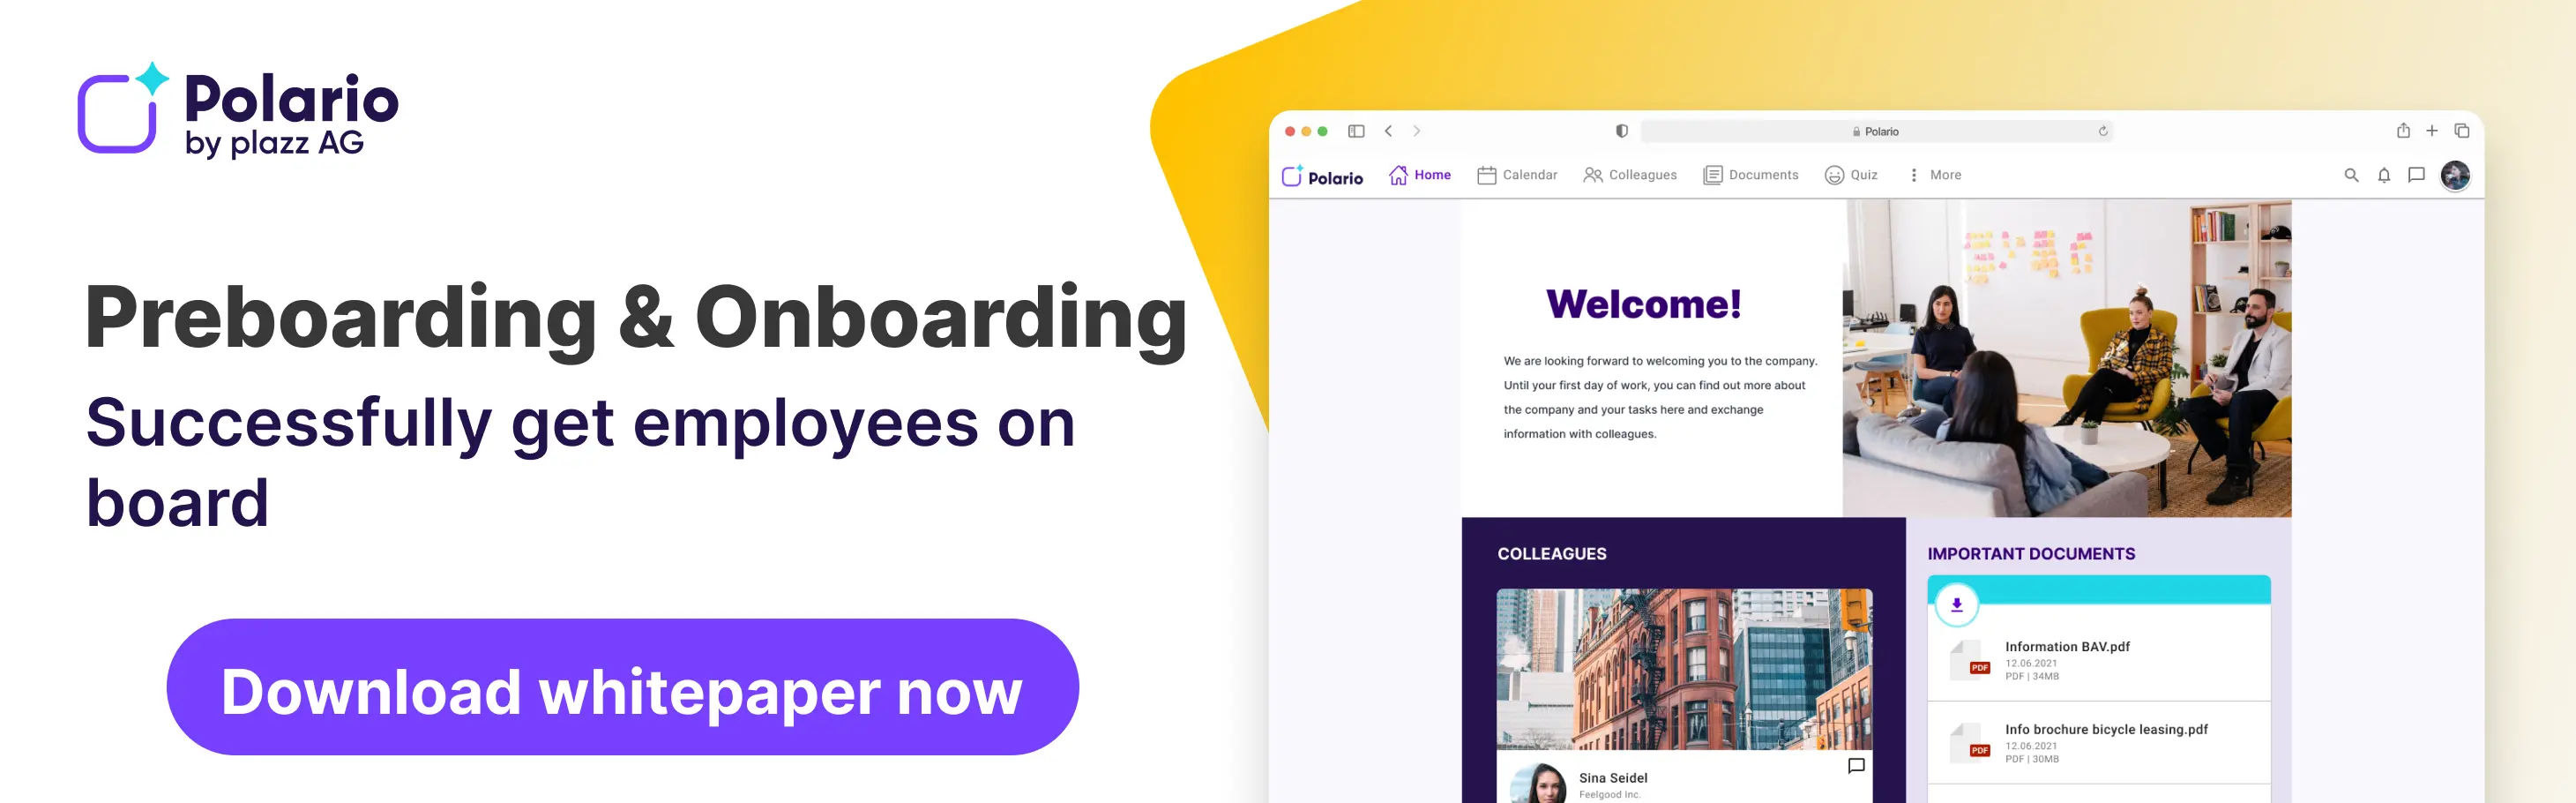 Call to Action to download the whitepaper: Preboarding & Onboarding